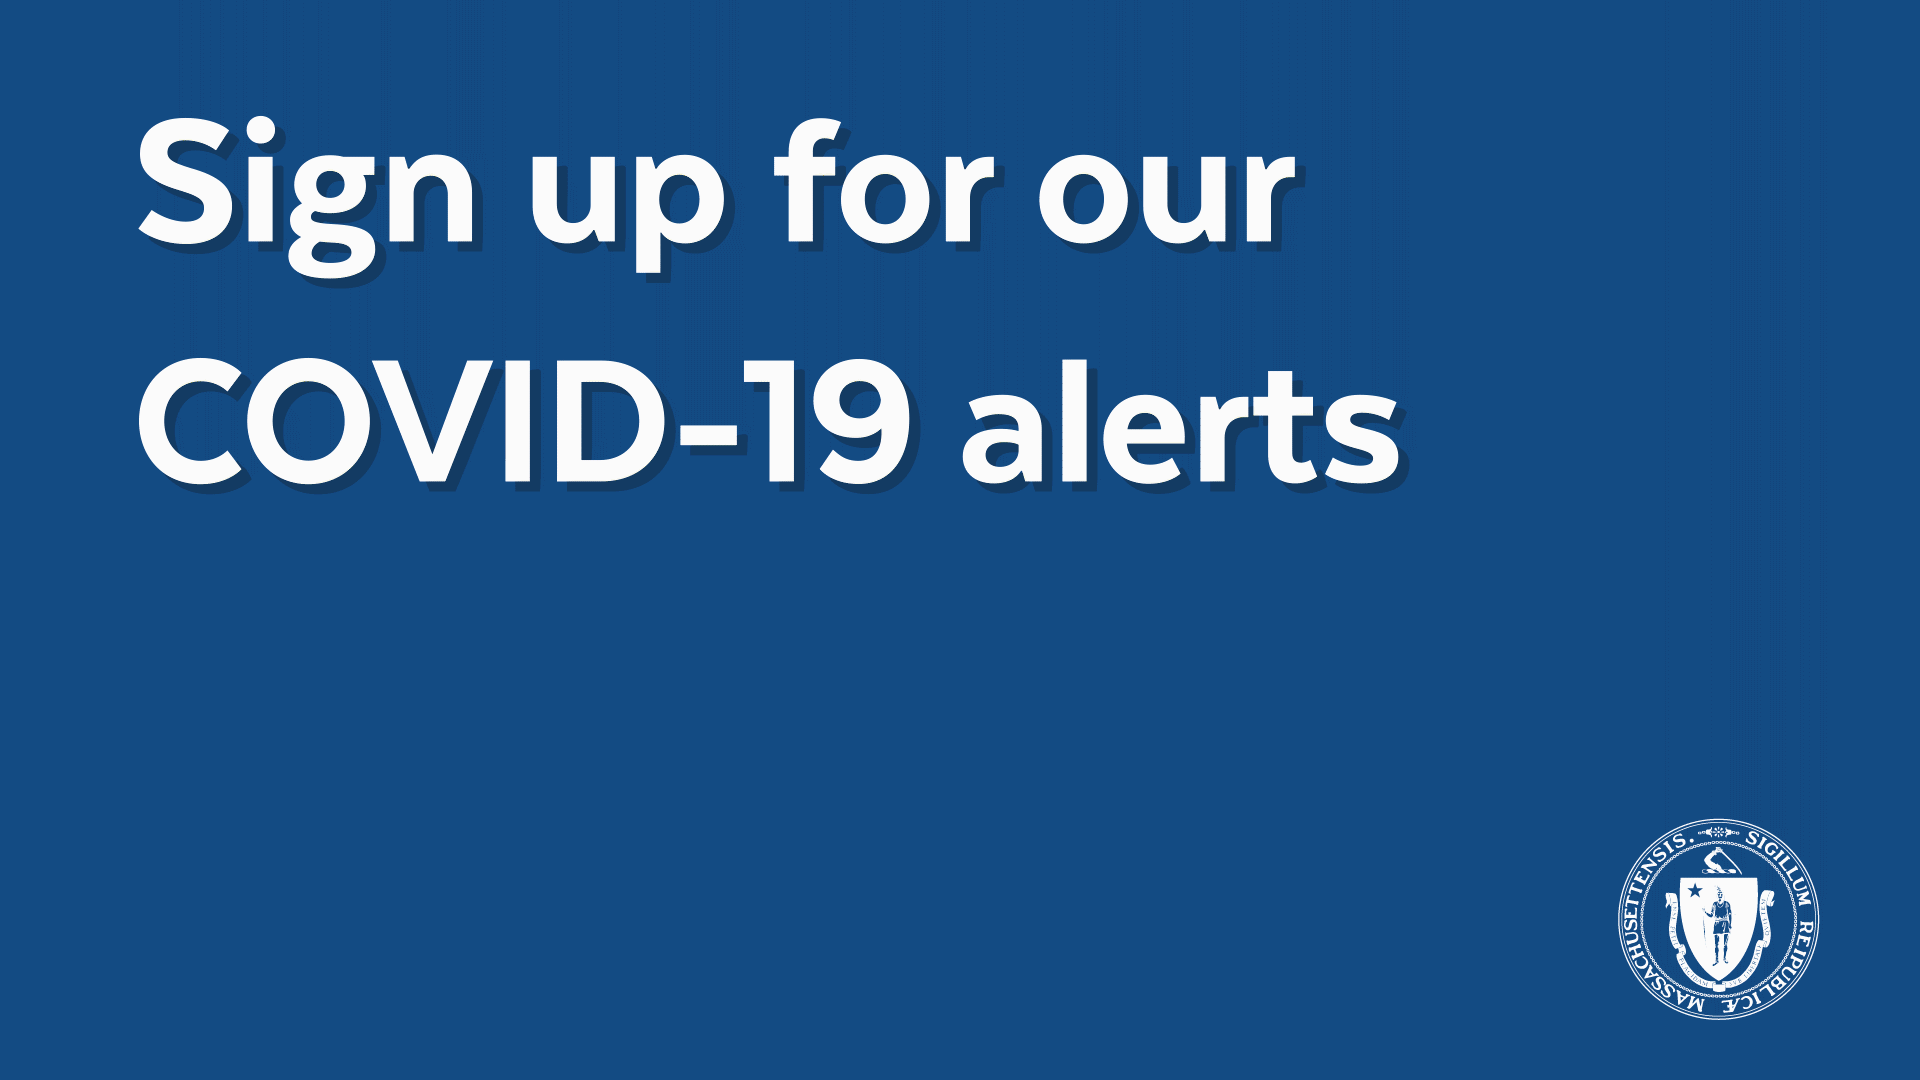 Sign up for Our COVID-19 alerts